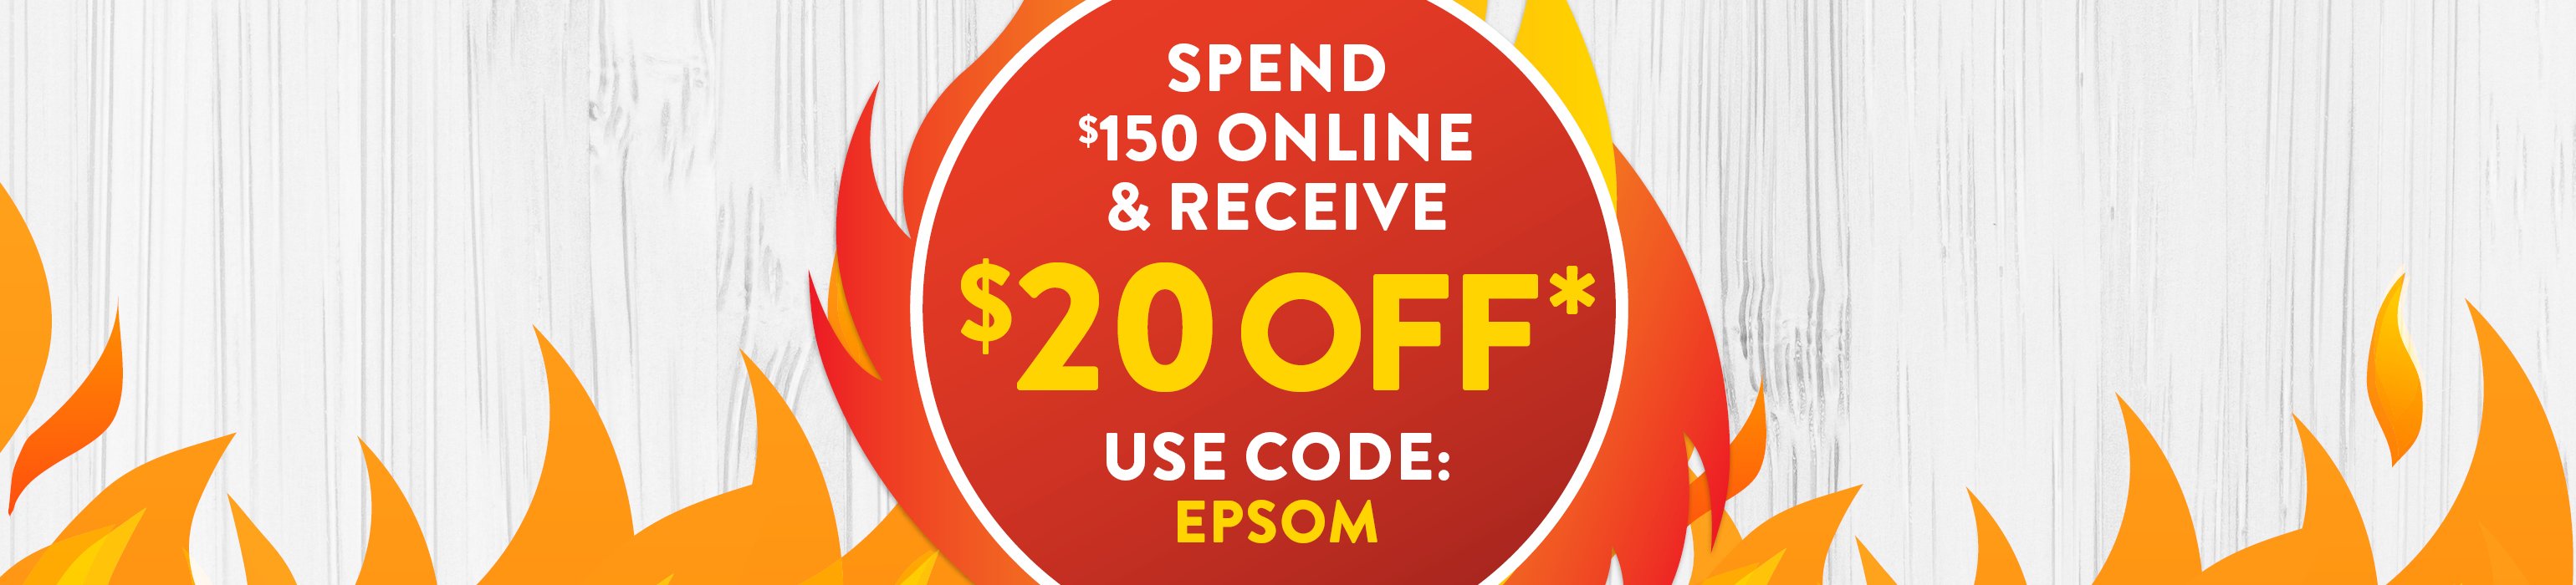 Spend $150 and get $20 off!